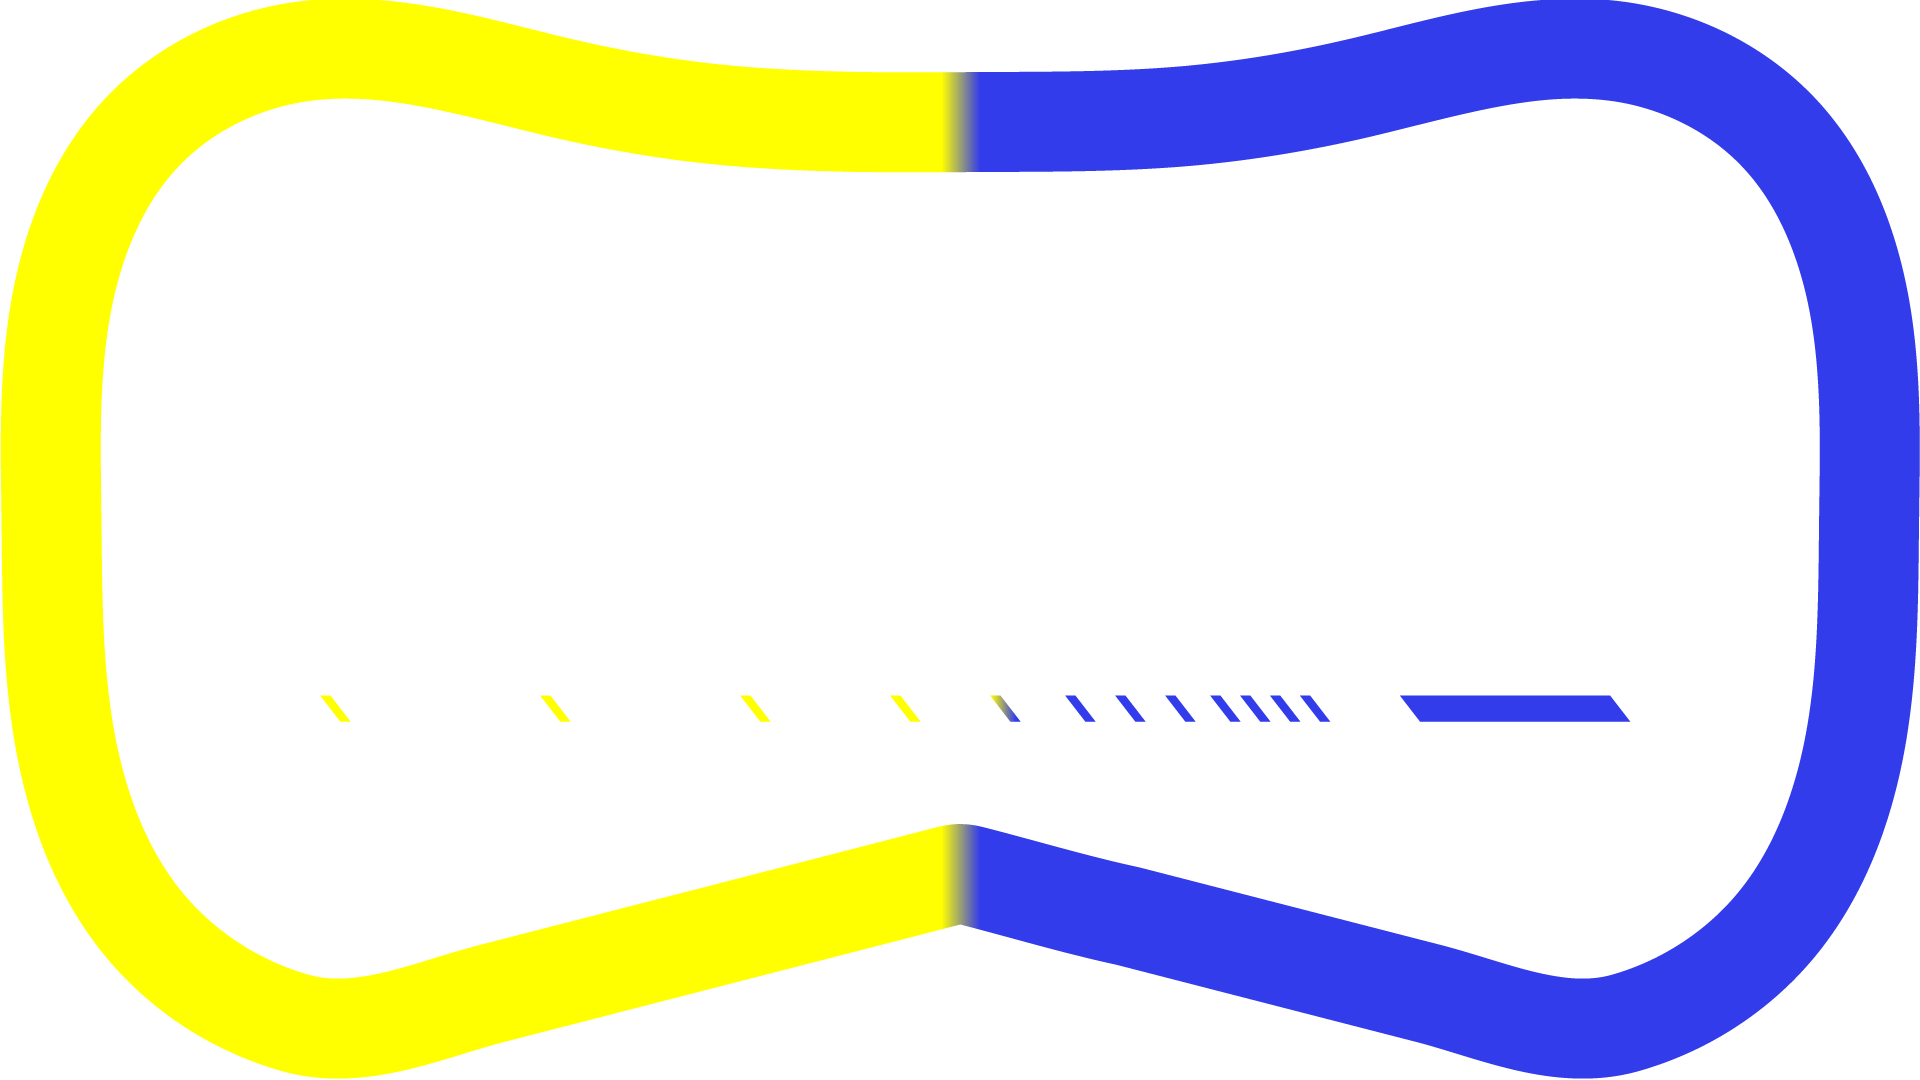 BCL logo, Basic outline of a VR headset with the letters BCL inside the outline